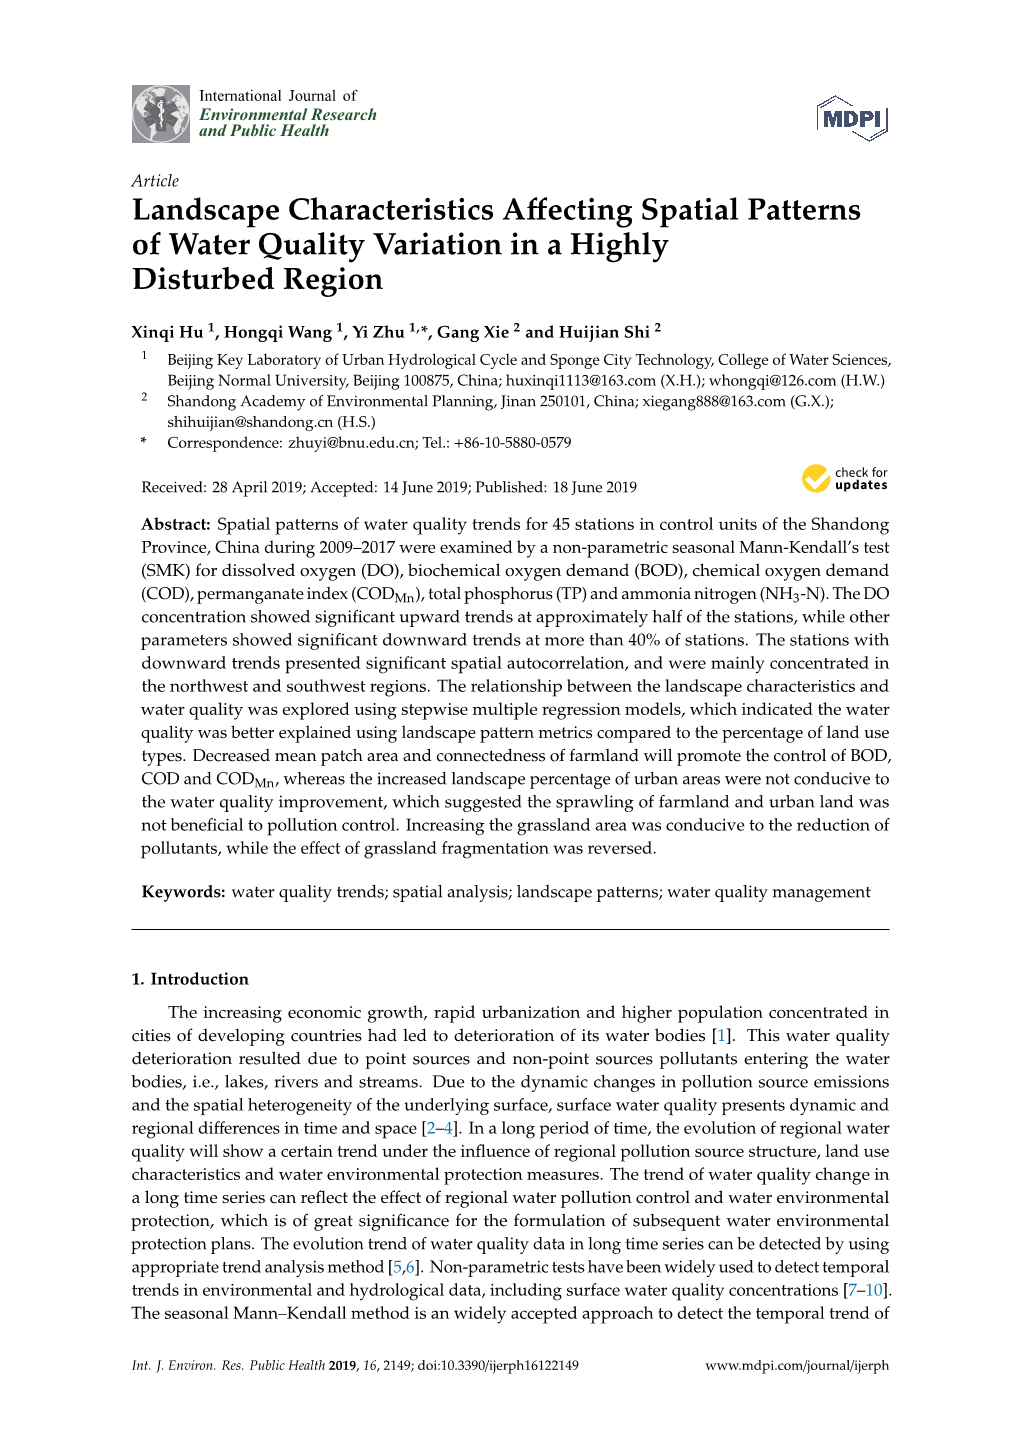 Landscape Characteristics Affecting Spatial Patterns of Water Quality